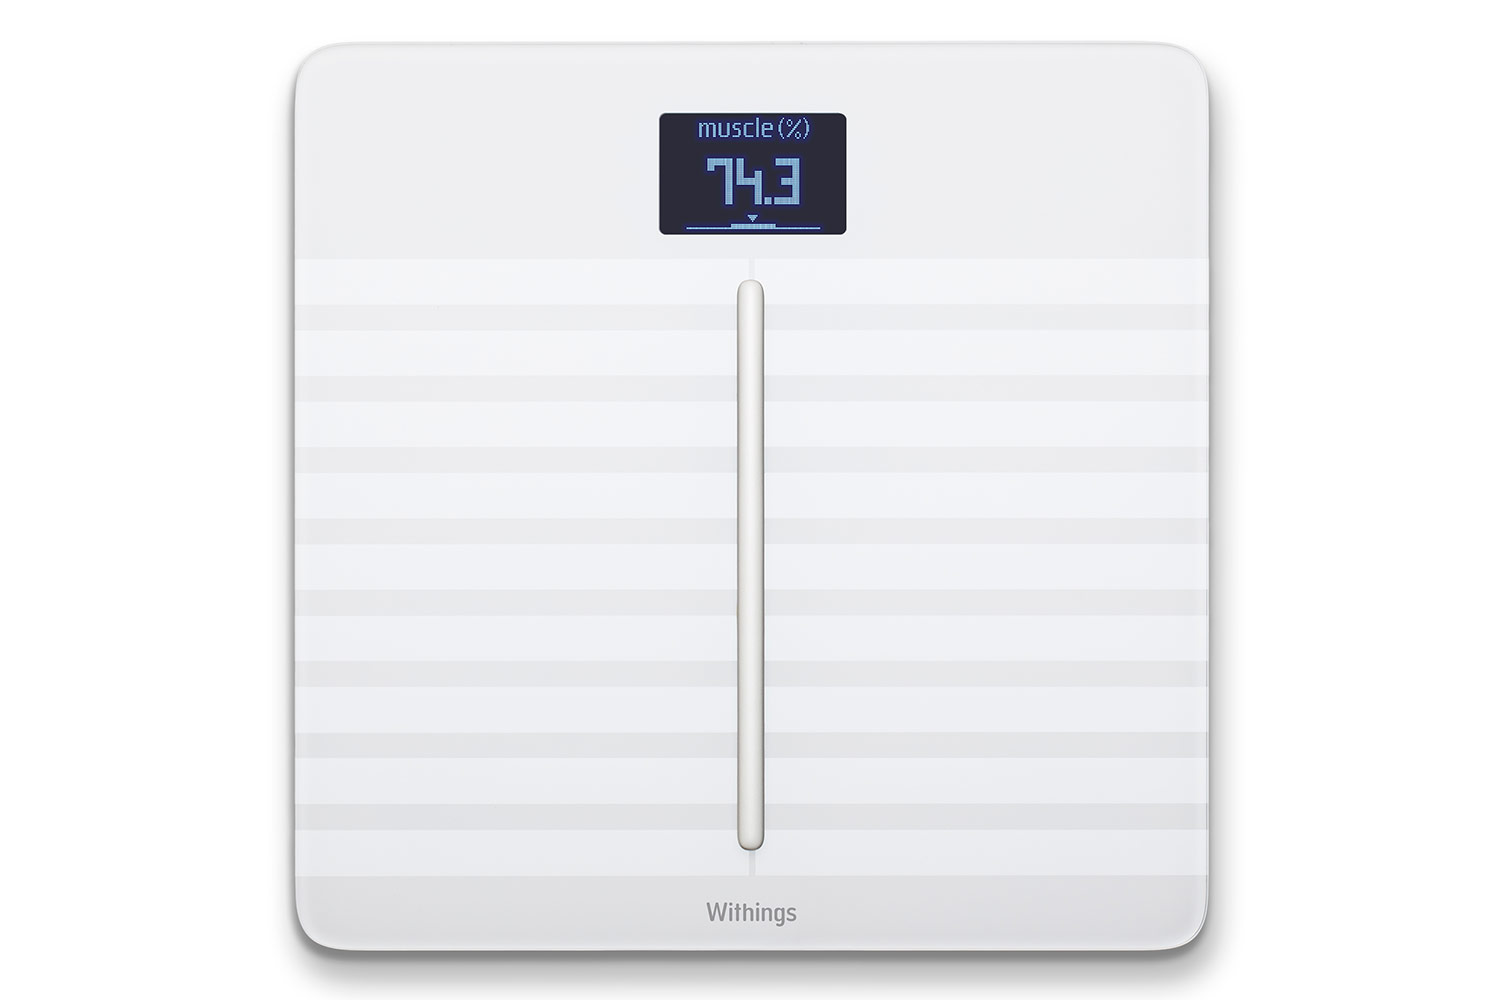 The Withings Body Cardio Scale Gives You a Heart Checkup